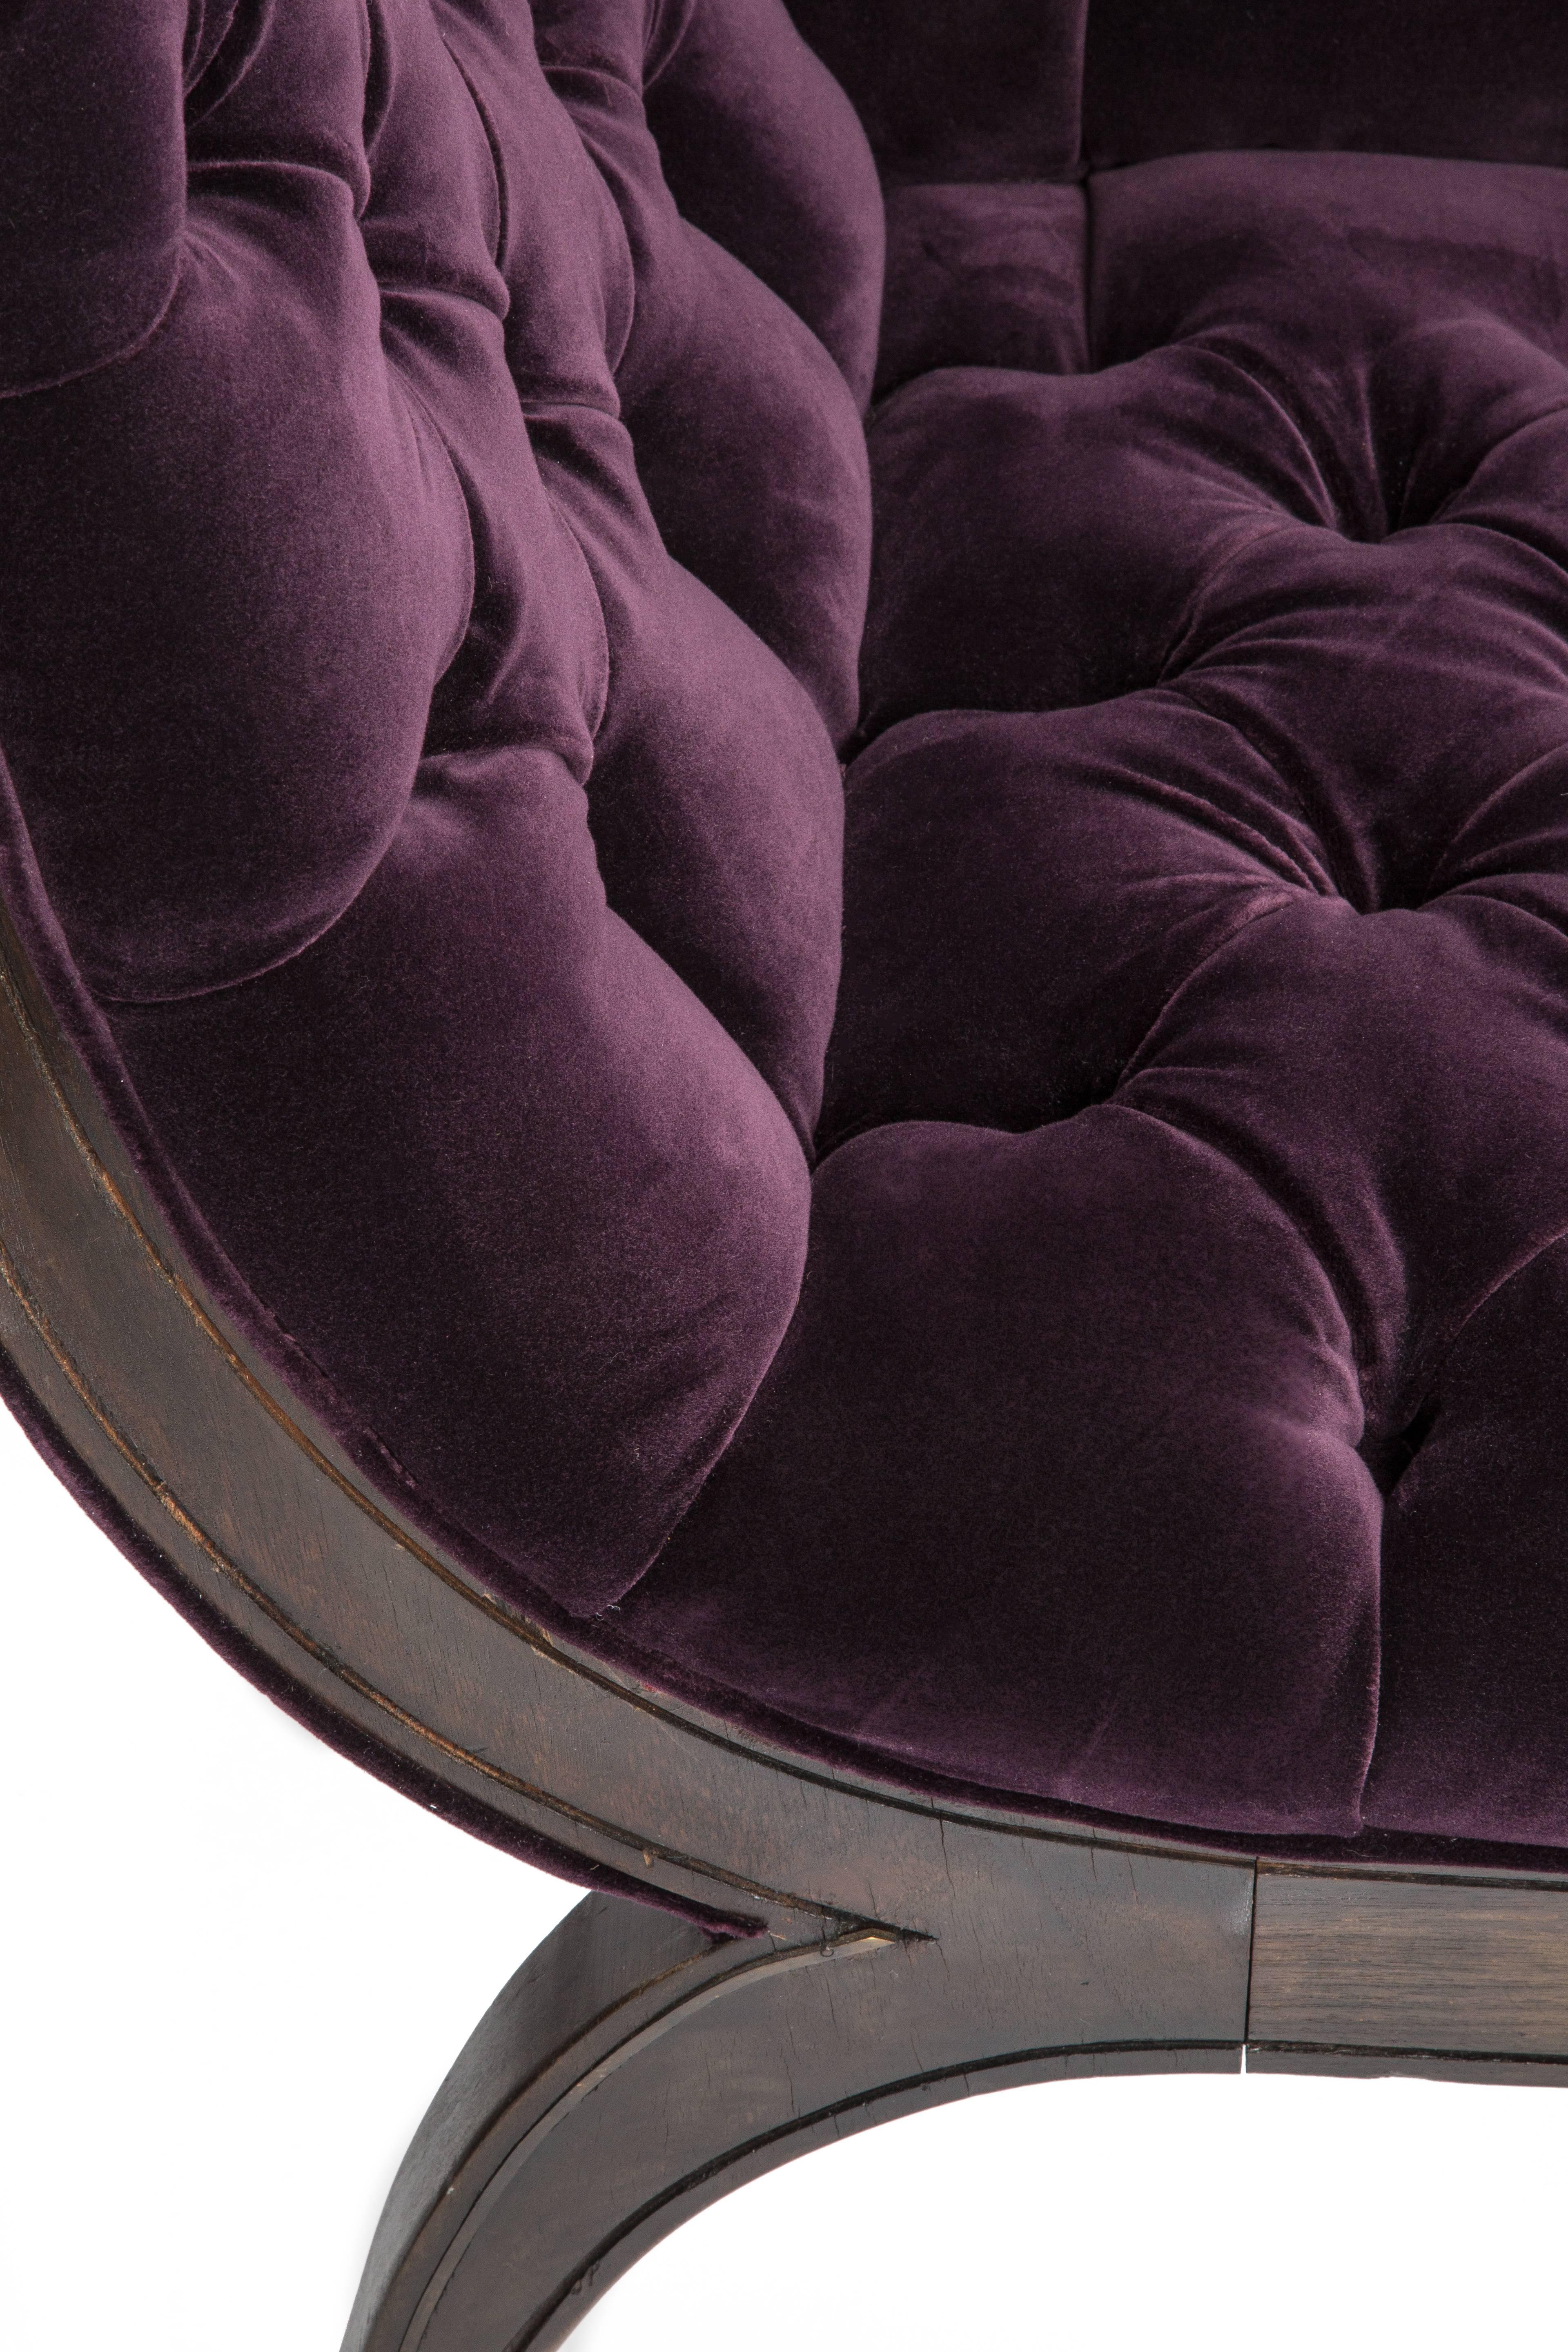 This 1920's inspired beautiful Egyptian style sofa features a fully tufted and elegant design throughout its body creating a comforting form.  Reupholstered in velvet cotton fabric adds a luxurious comfort to its textile weaving design. Notice the